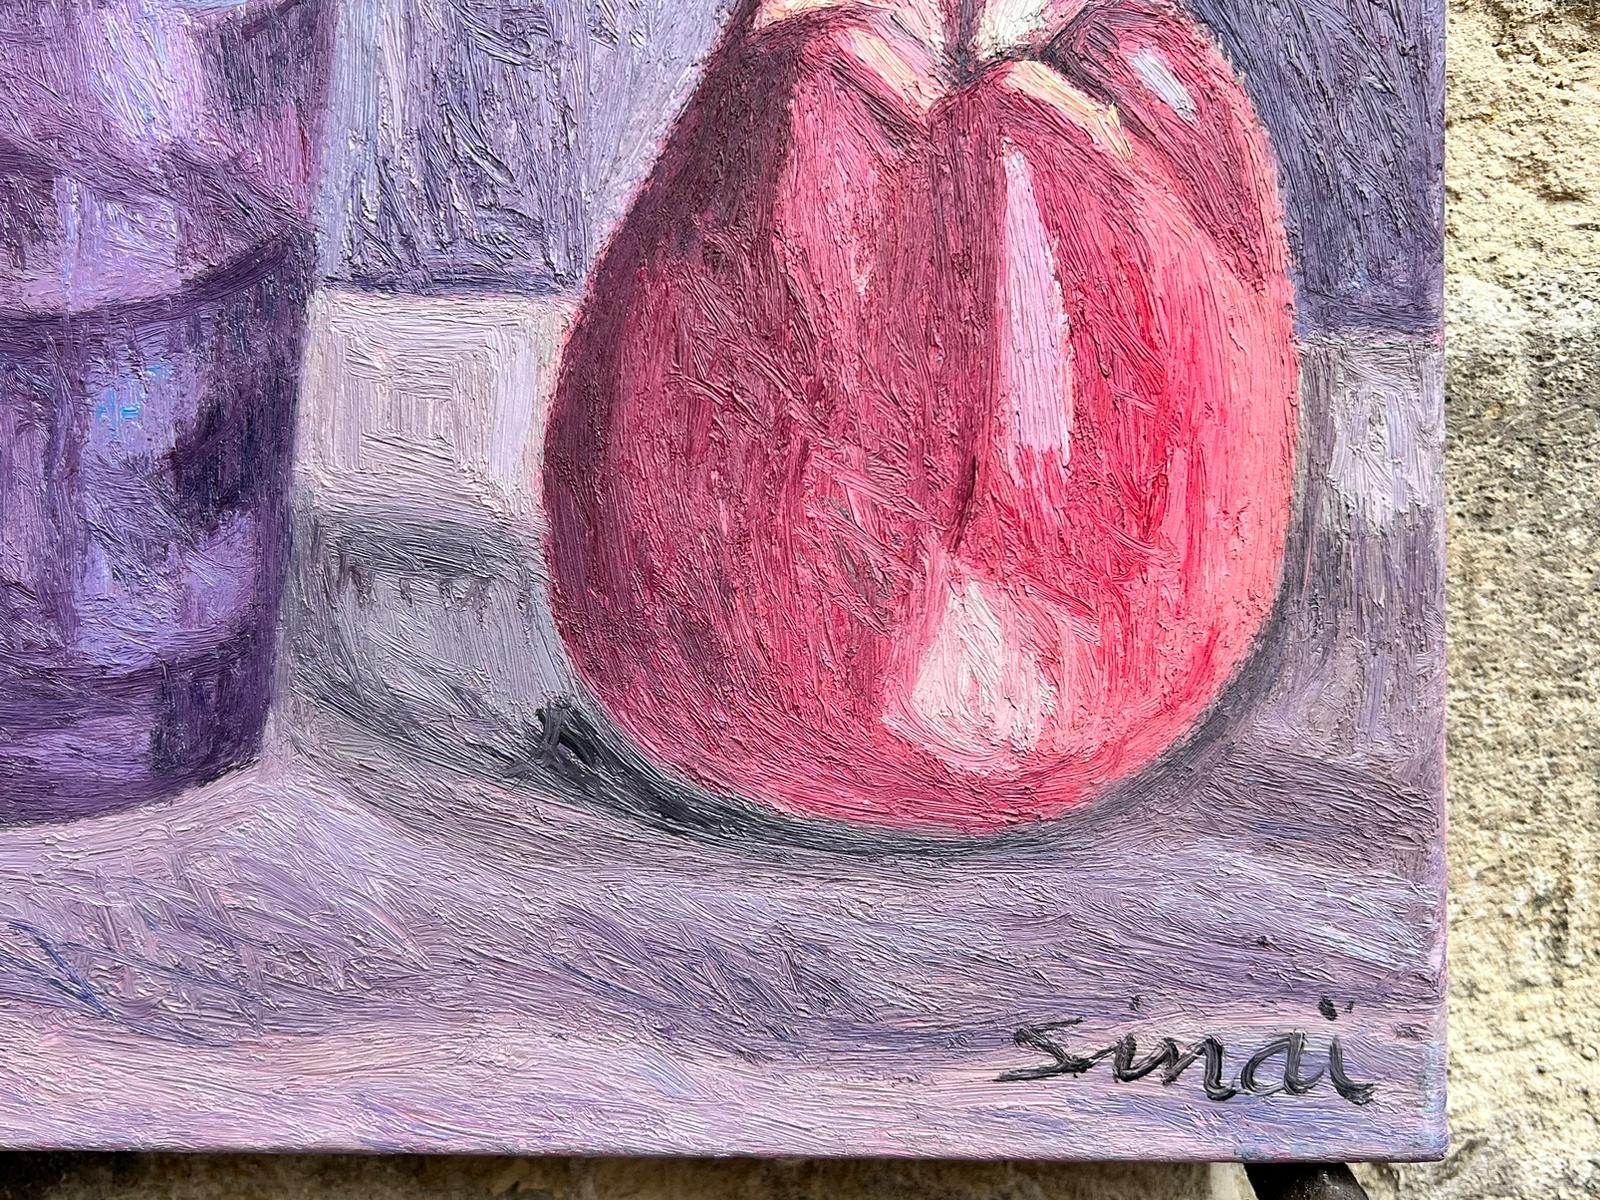 signed Sinai
French Post-Impressionist School, late 20th century
oil painting on canvas, unframed
canvas: 8.75 x 10.5 inches
provenance: private collection
condition: very good and sound condition 
